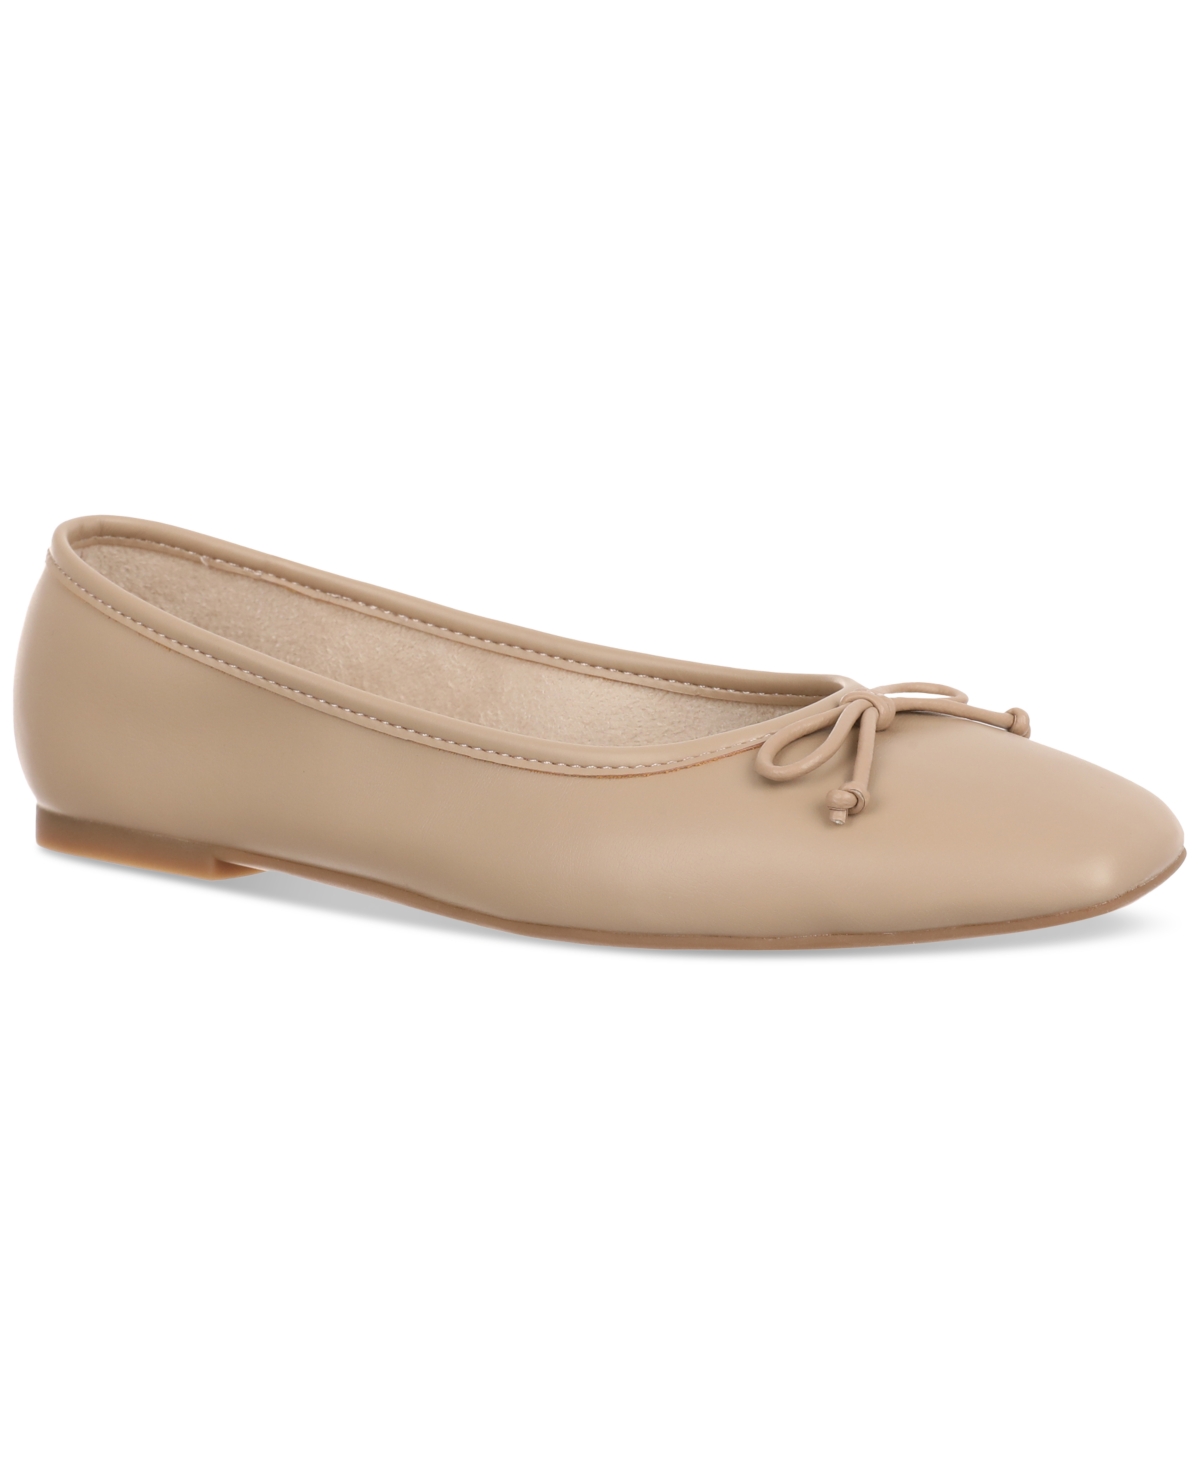 Women's Naomie Ballet Flats, Created for Macy's - Gold Smooth